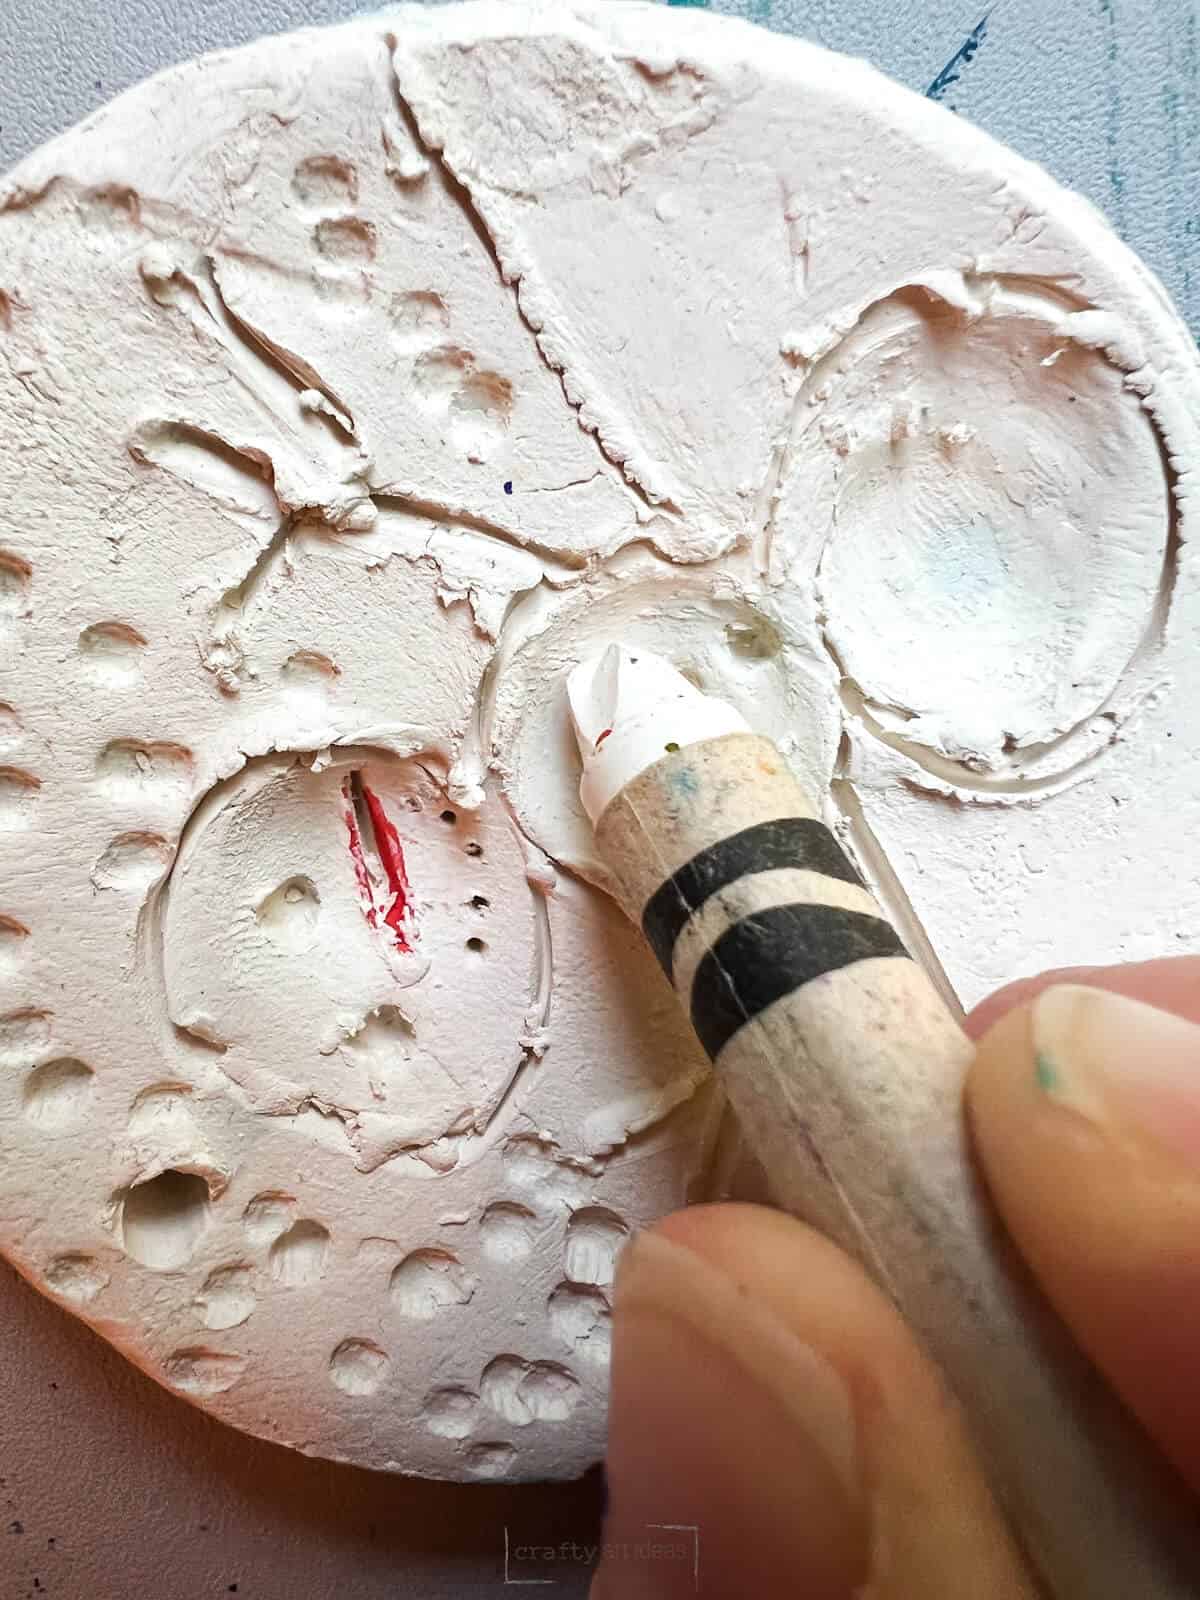 white crayon being applied to clay snowman slab.